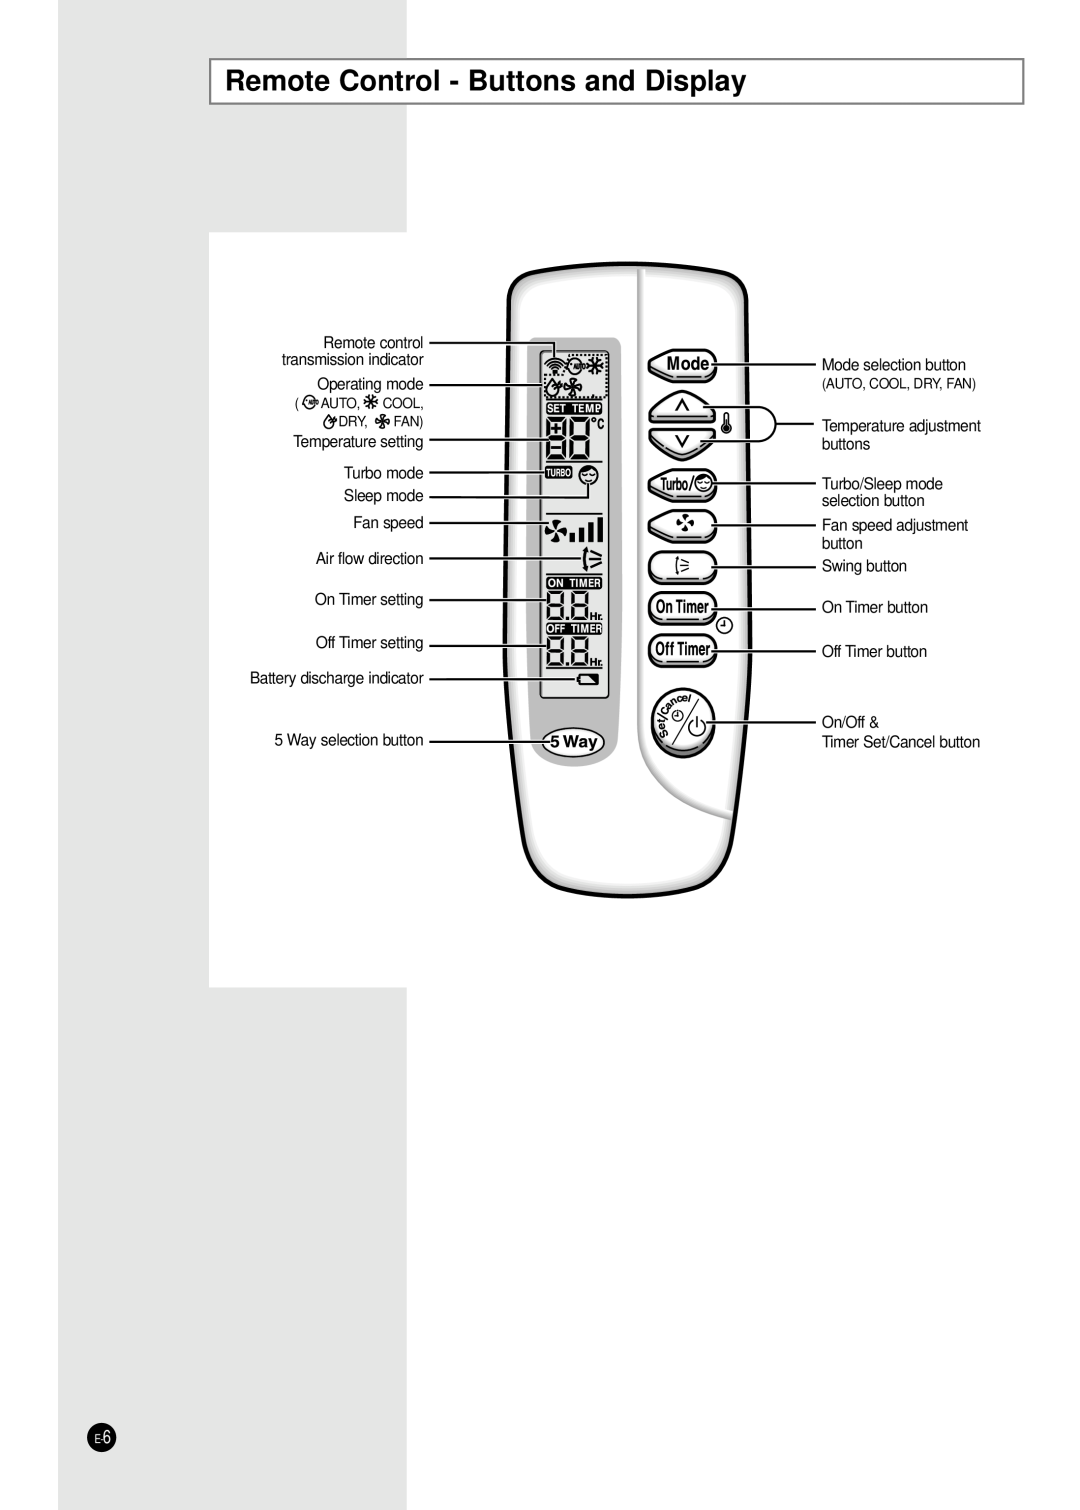 Samsung SC12ZB1 manuel dutilisation Remote Control - Buttons and Display 